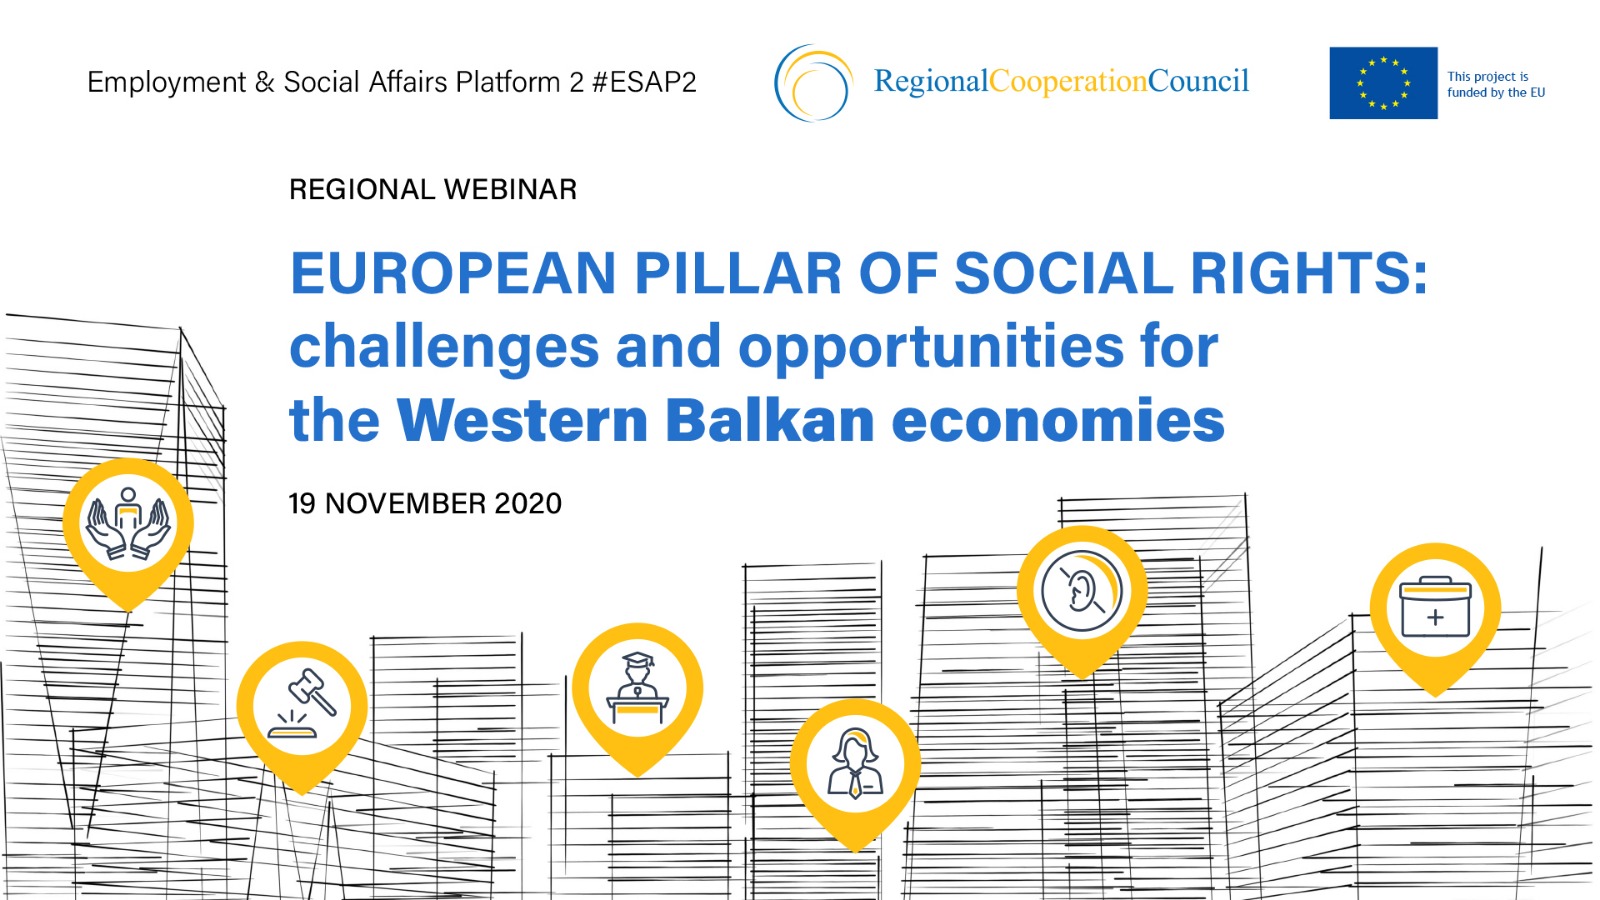 ESAP 2: Regional meeting on challenges and opportunities of Social Rights in the Western Balkans was held online on 19 November 2020 